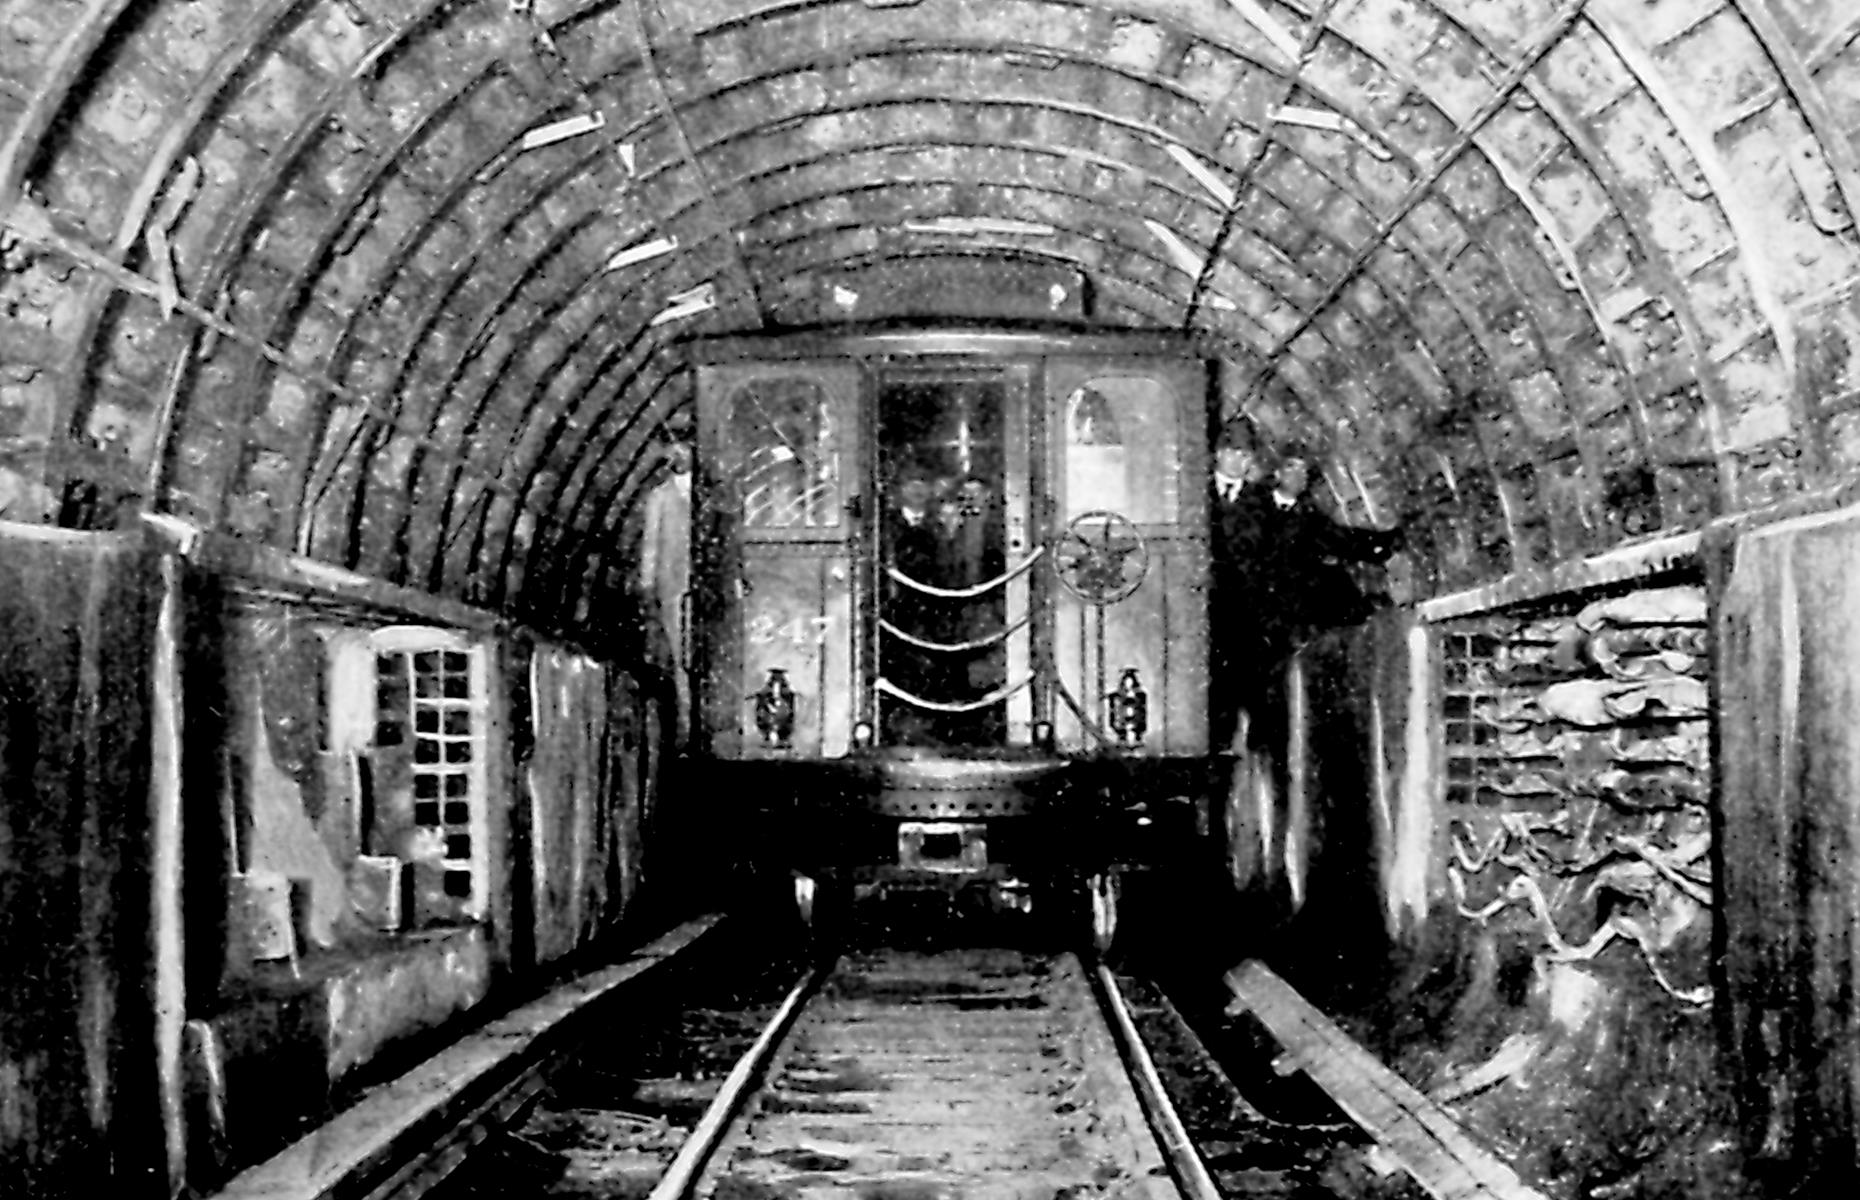 New York continued to develop its underground travel network throughout the early 20th century. Pictured here are the Hudson and Manhattan Tunnels (now known as the Uptown Hudson Tubes) in the throes of construction in 1908. Passing under the mighty Hudson River and connecting Manhattan with the state of New Jersey, they were the first railroad tunnels to be built under a major river in the States. They're still operational today.